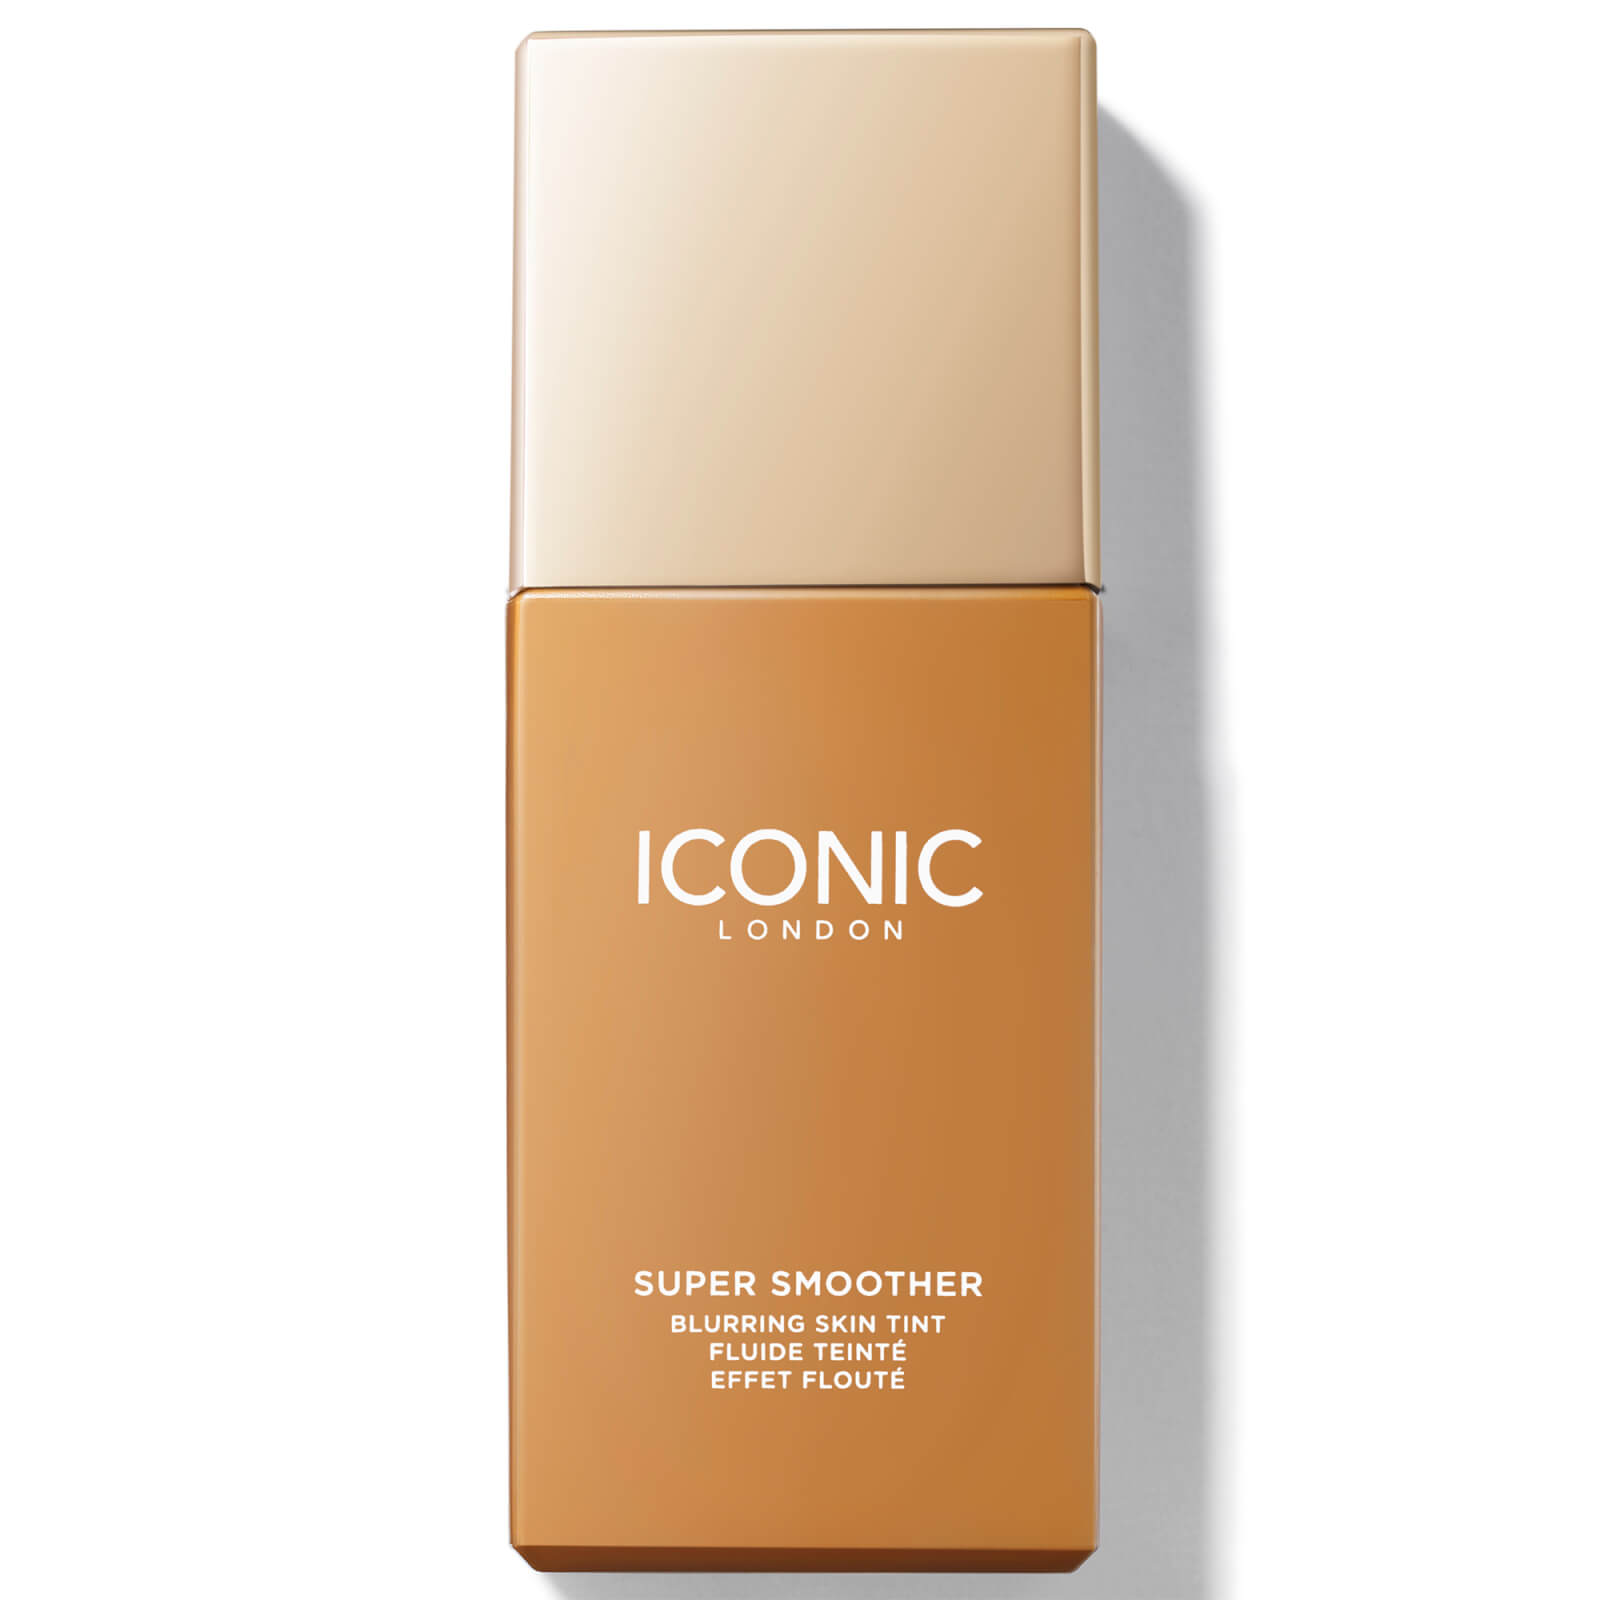 ICONIC London Super Smoother Blurring Skin Tint 30ml (Various Shades) - Golden Tan